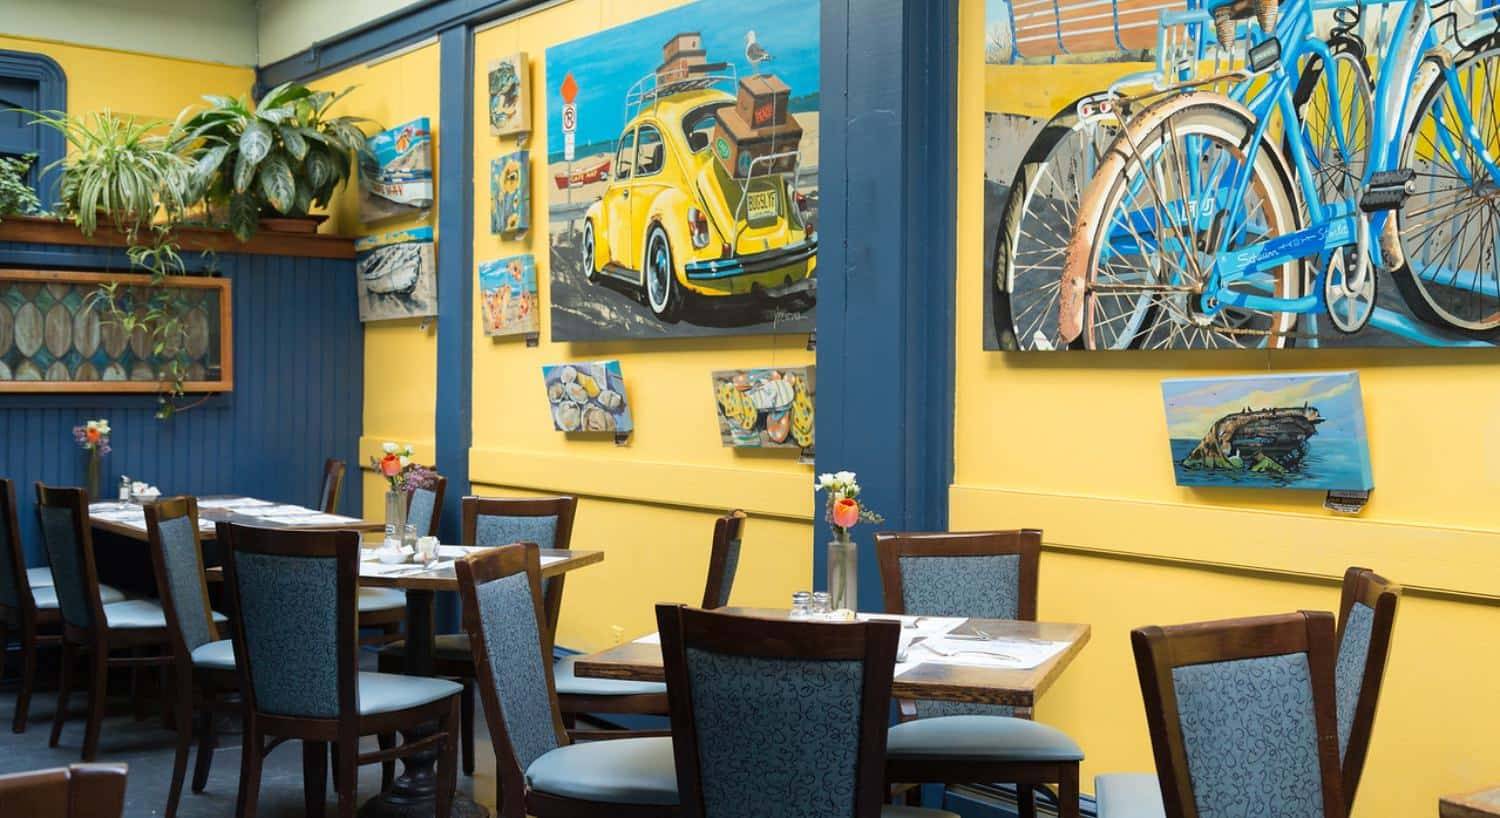 Dining area with dark wooden tables and chairs, yellow walls with blue trim, and large paintings on the walls